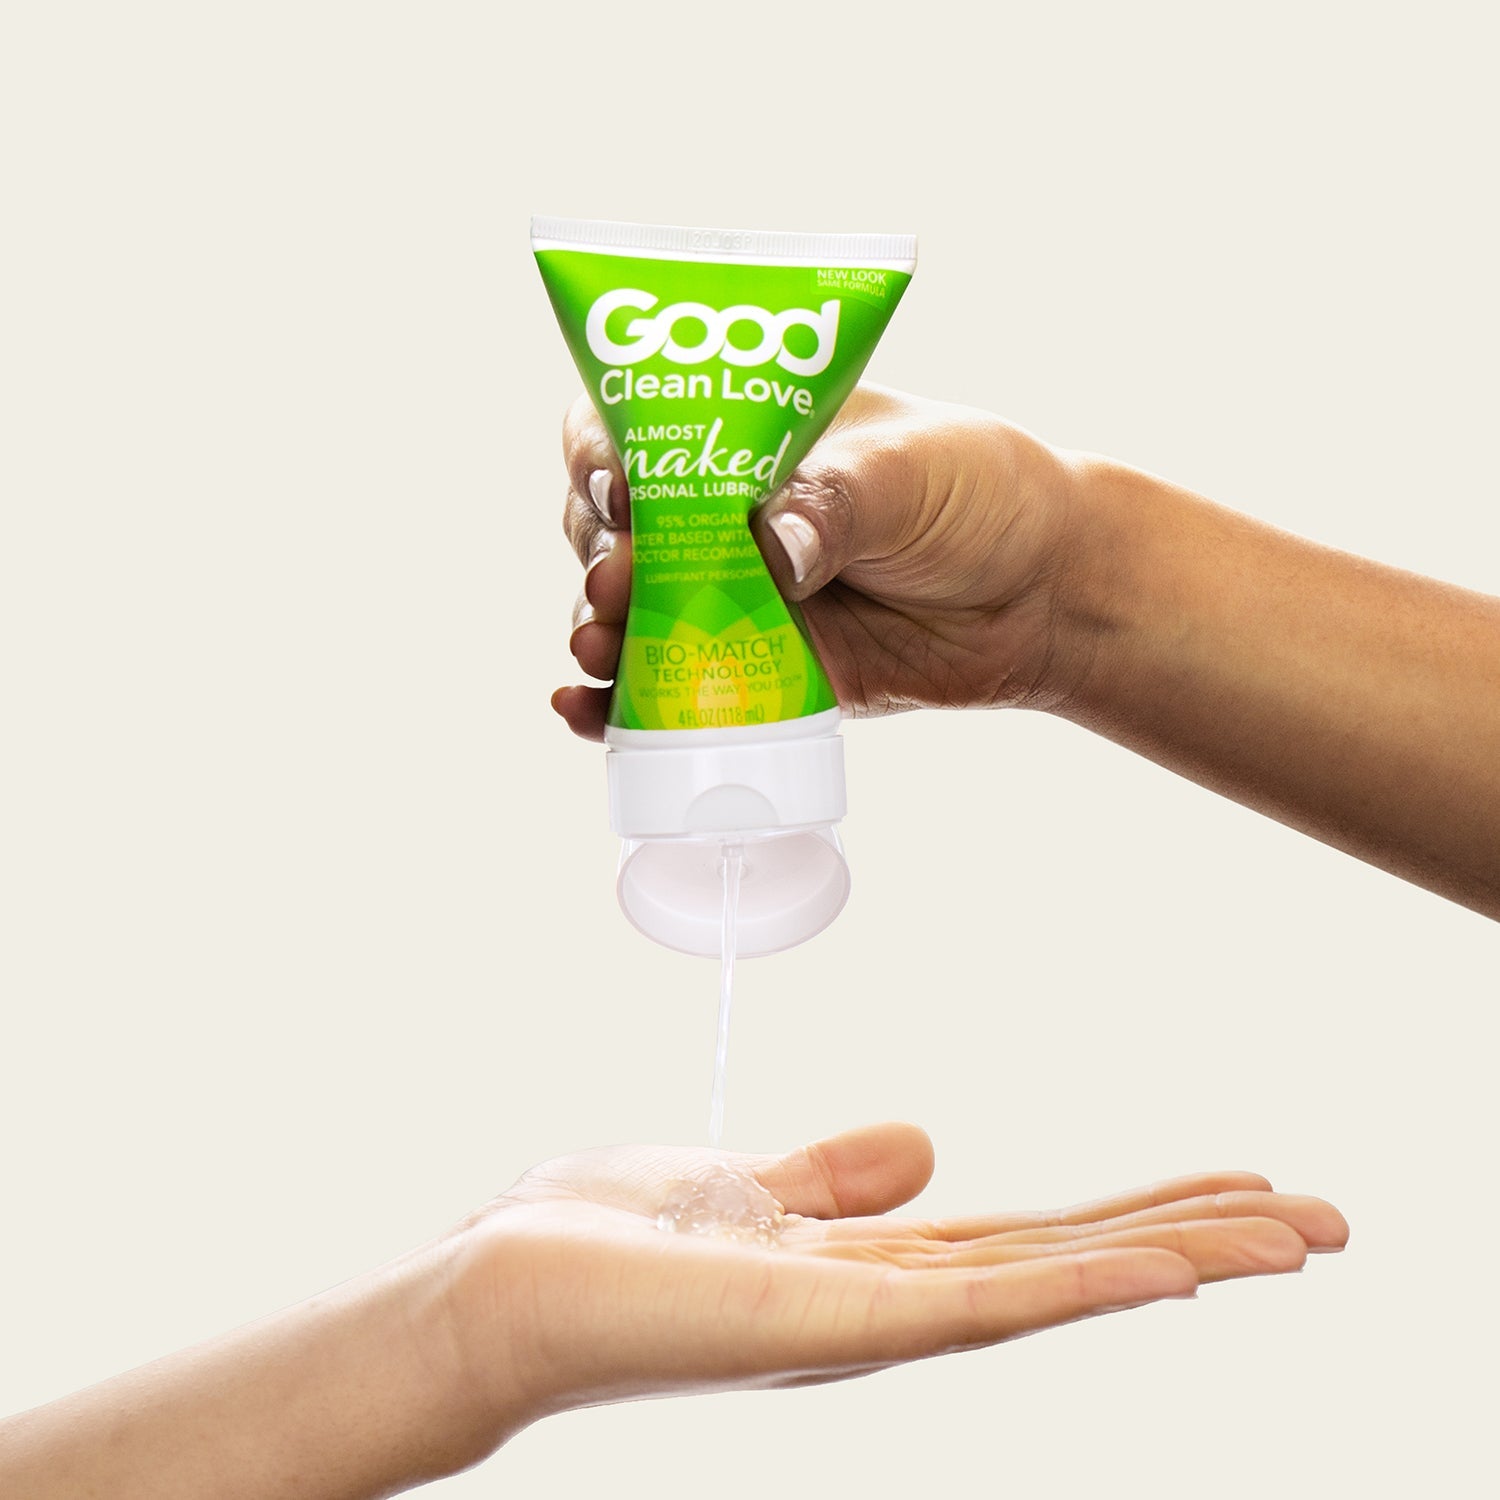 Good Clean Love Almost Naked Organic Personal Lubricant MADE SAFE